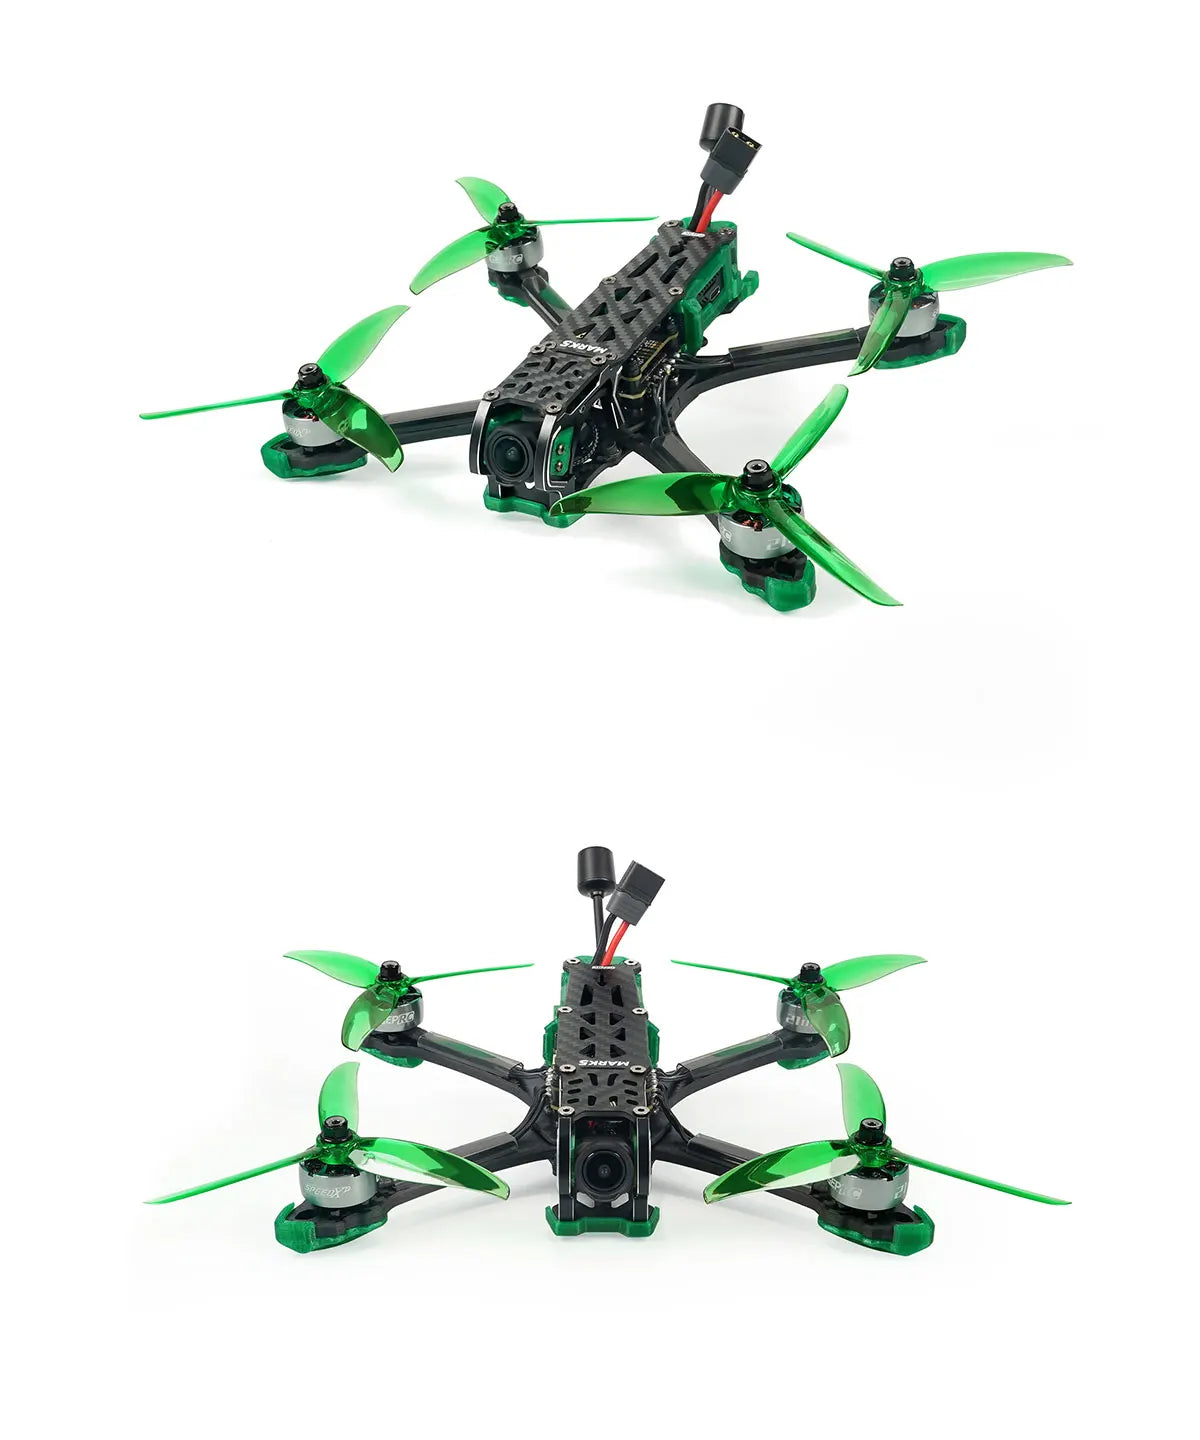 GEPRC New MARK5 HD O3 Freestyle FPV Drone, Built-in Bluetooth, supports mobile phone wireless connection for parameter tuning